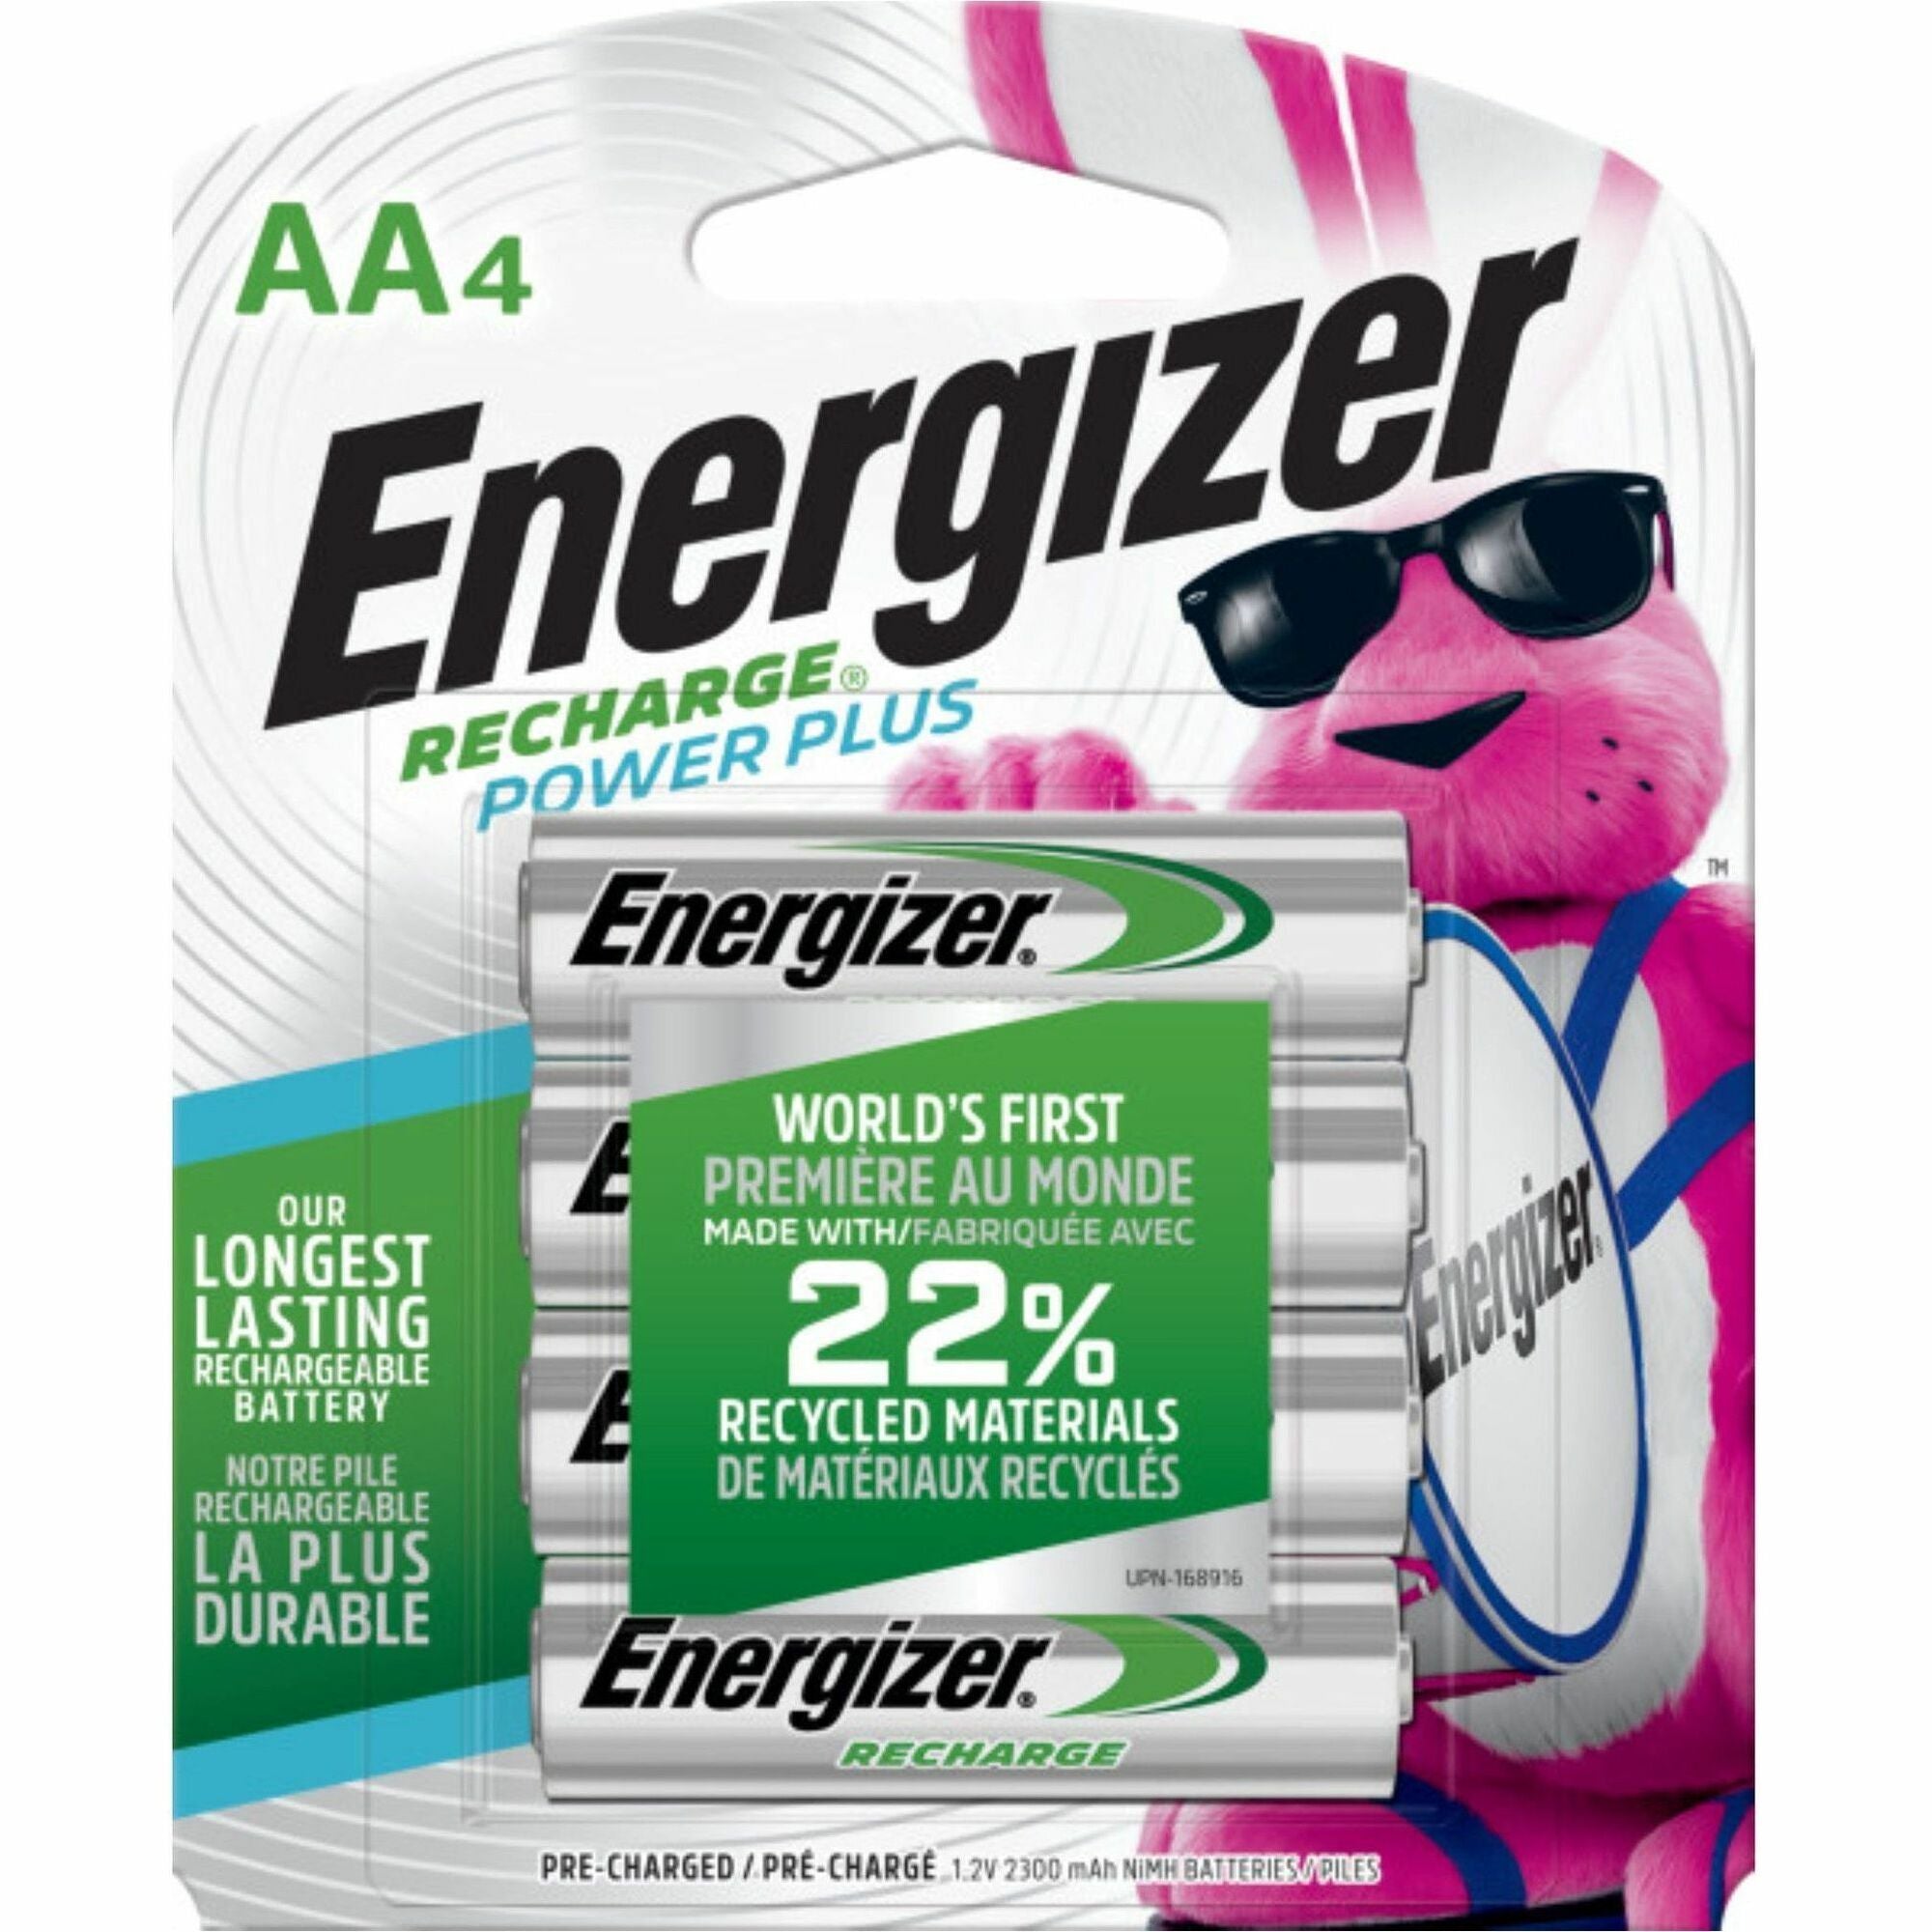 energizer-recharge-power-plus-rechargeable-aa-battery-4-packs-for-multipurpose-battery-rechargeable-aa-2300-mah-12-v-dc-4-carton_evenh15bp4ct - 1